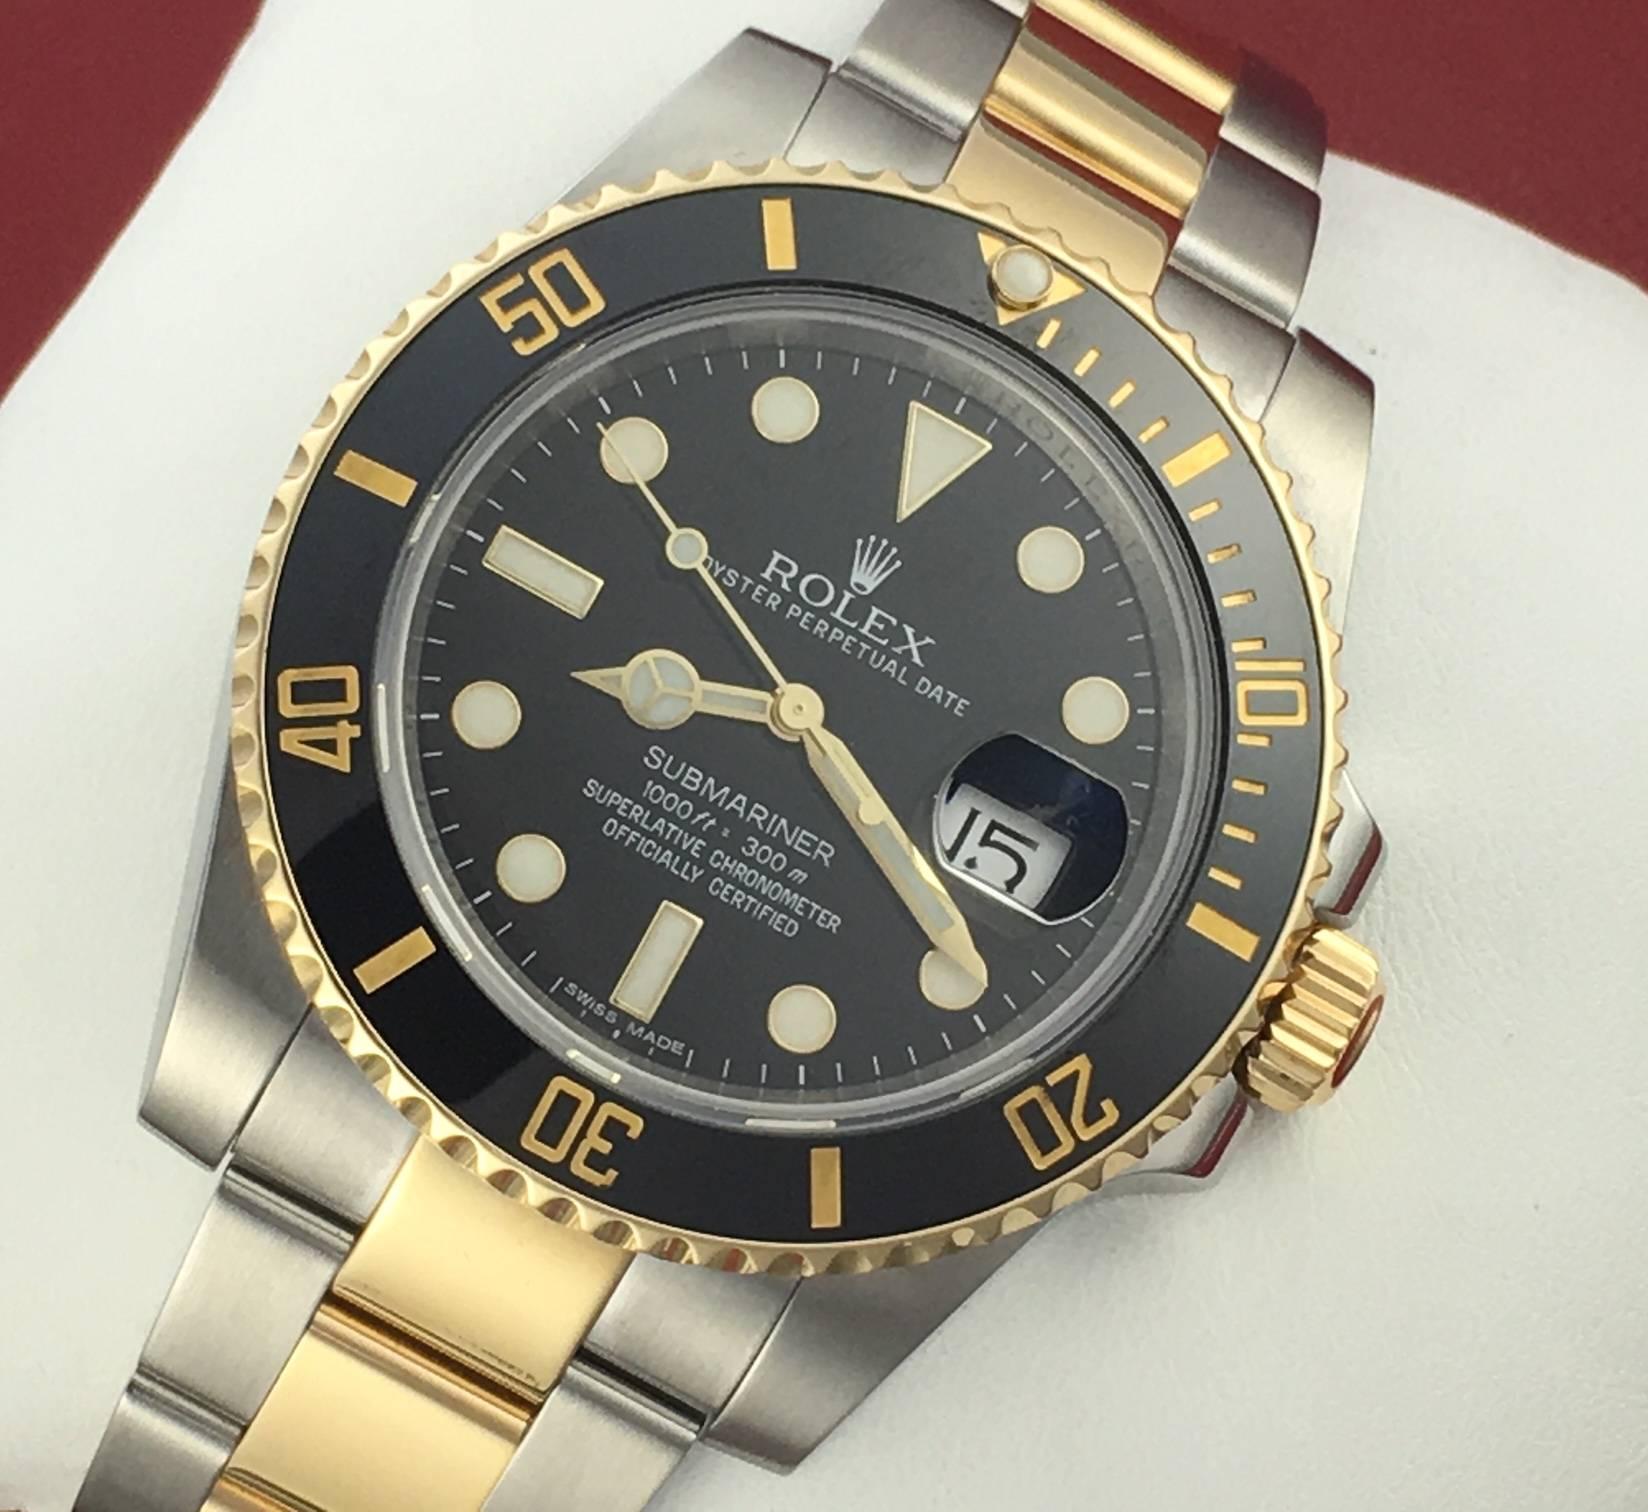 Rolex Mens Submariner Model 116613N at a great price.  Automatic Winding Oyster Perpetual Date Movement.  Features  stainless steel  case with Ceramic Black Bezel insert, diameter 41mm. Stainless steel and 18k Yellow Gold Oyster bracelet with